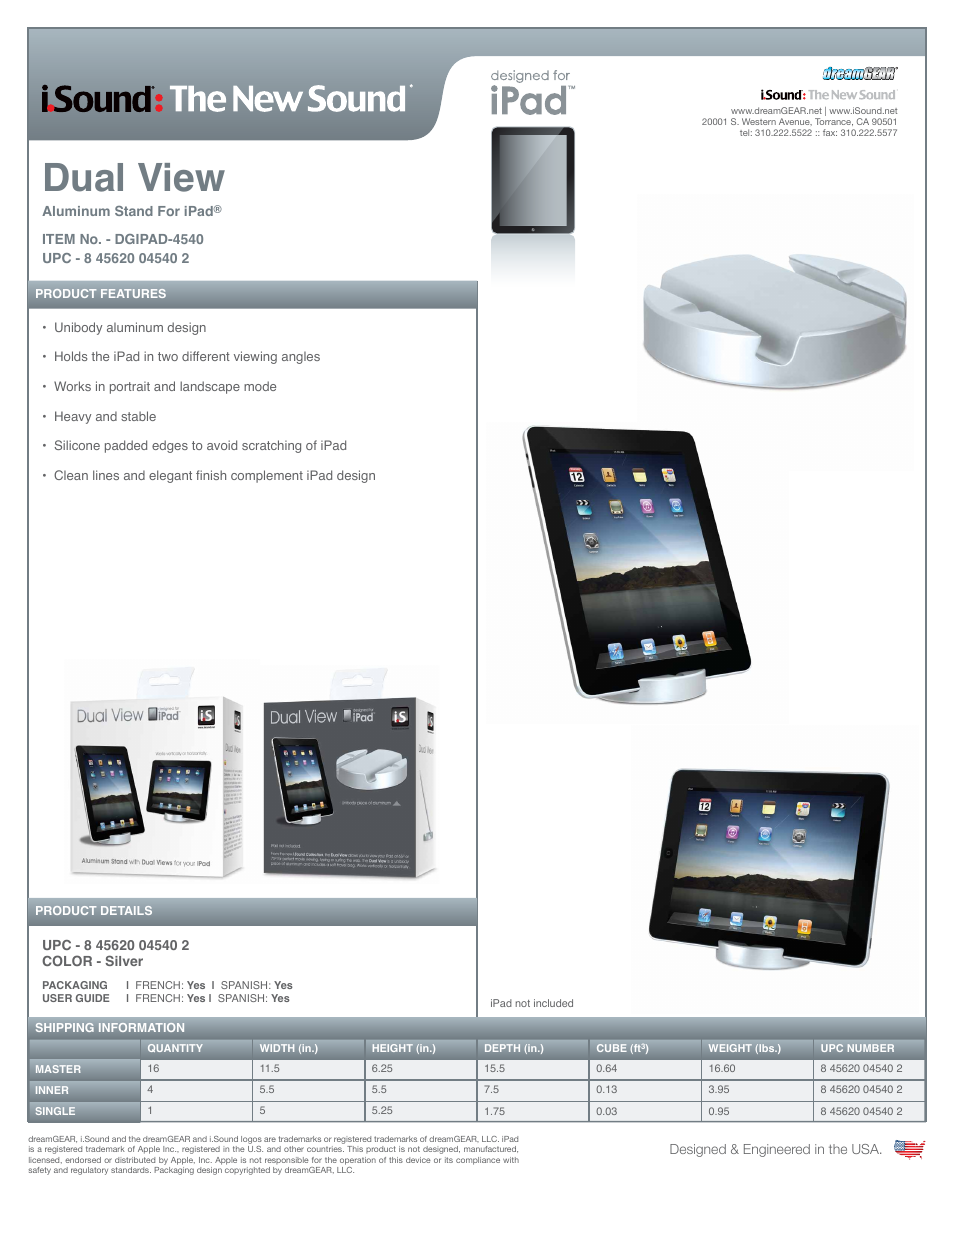 Dual View for iPad - Sell Sheet